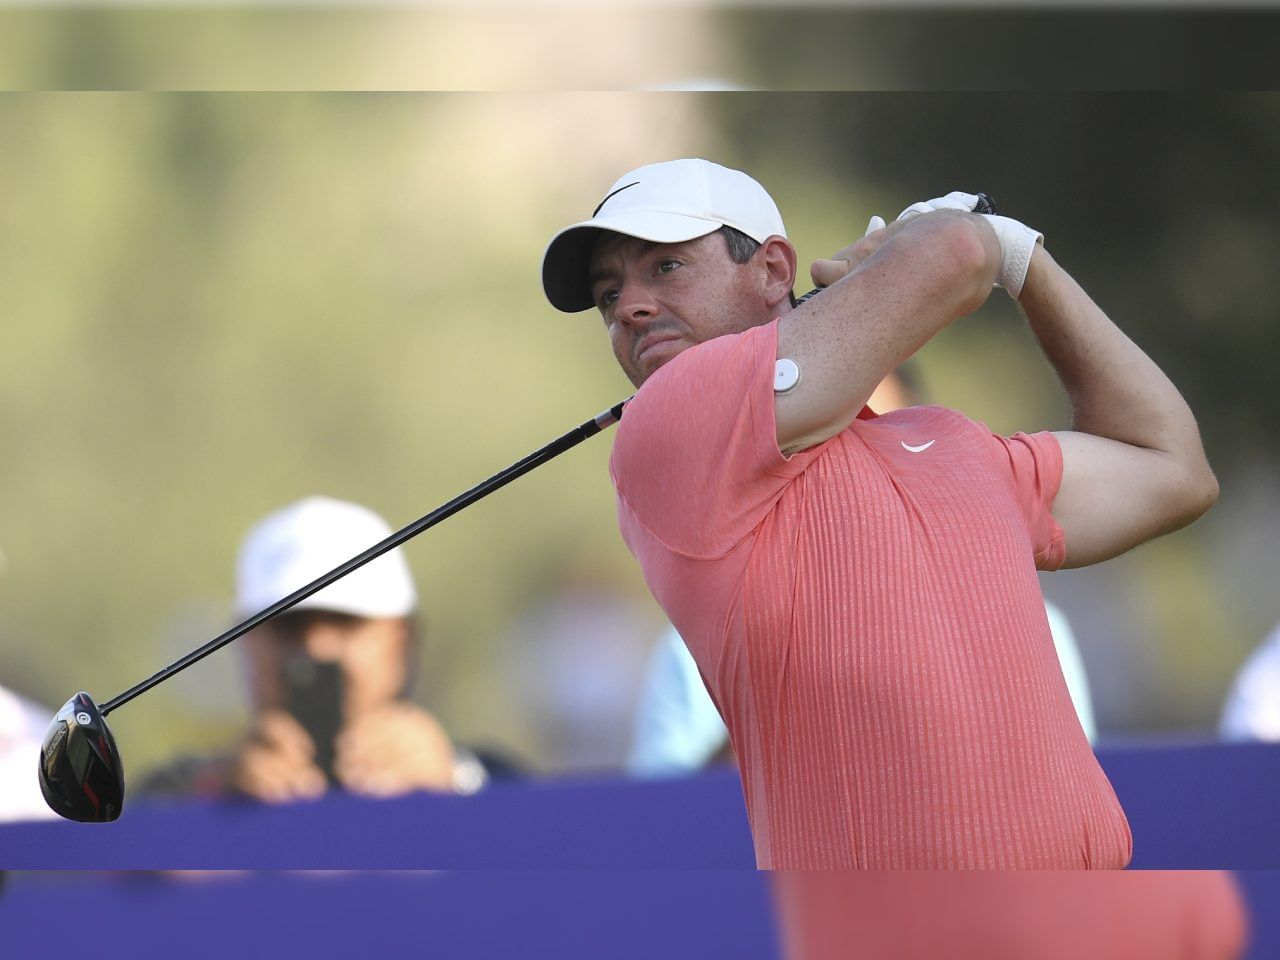 McIlroy joined by Kim and Burns, Scheffler with Homa at Masters